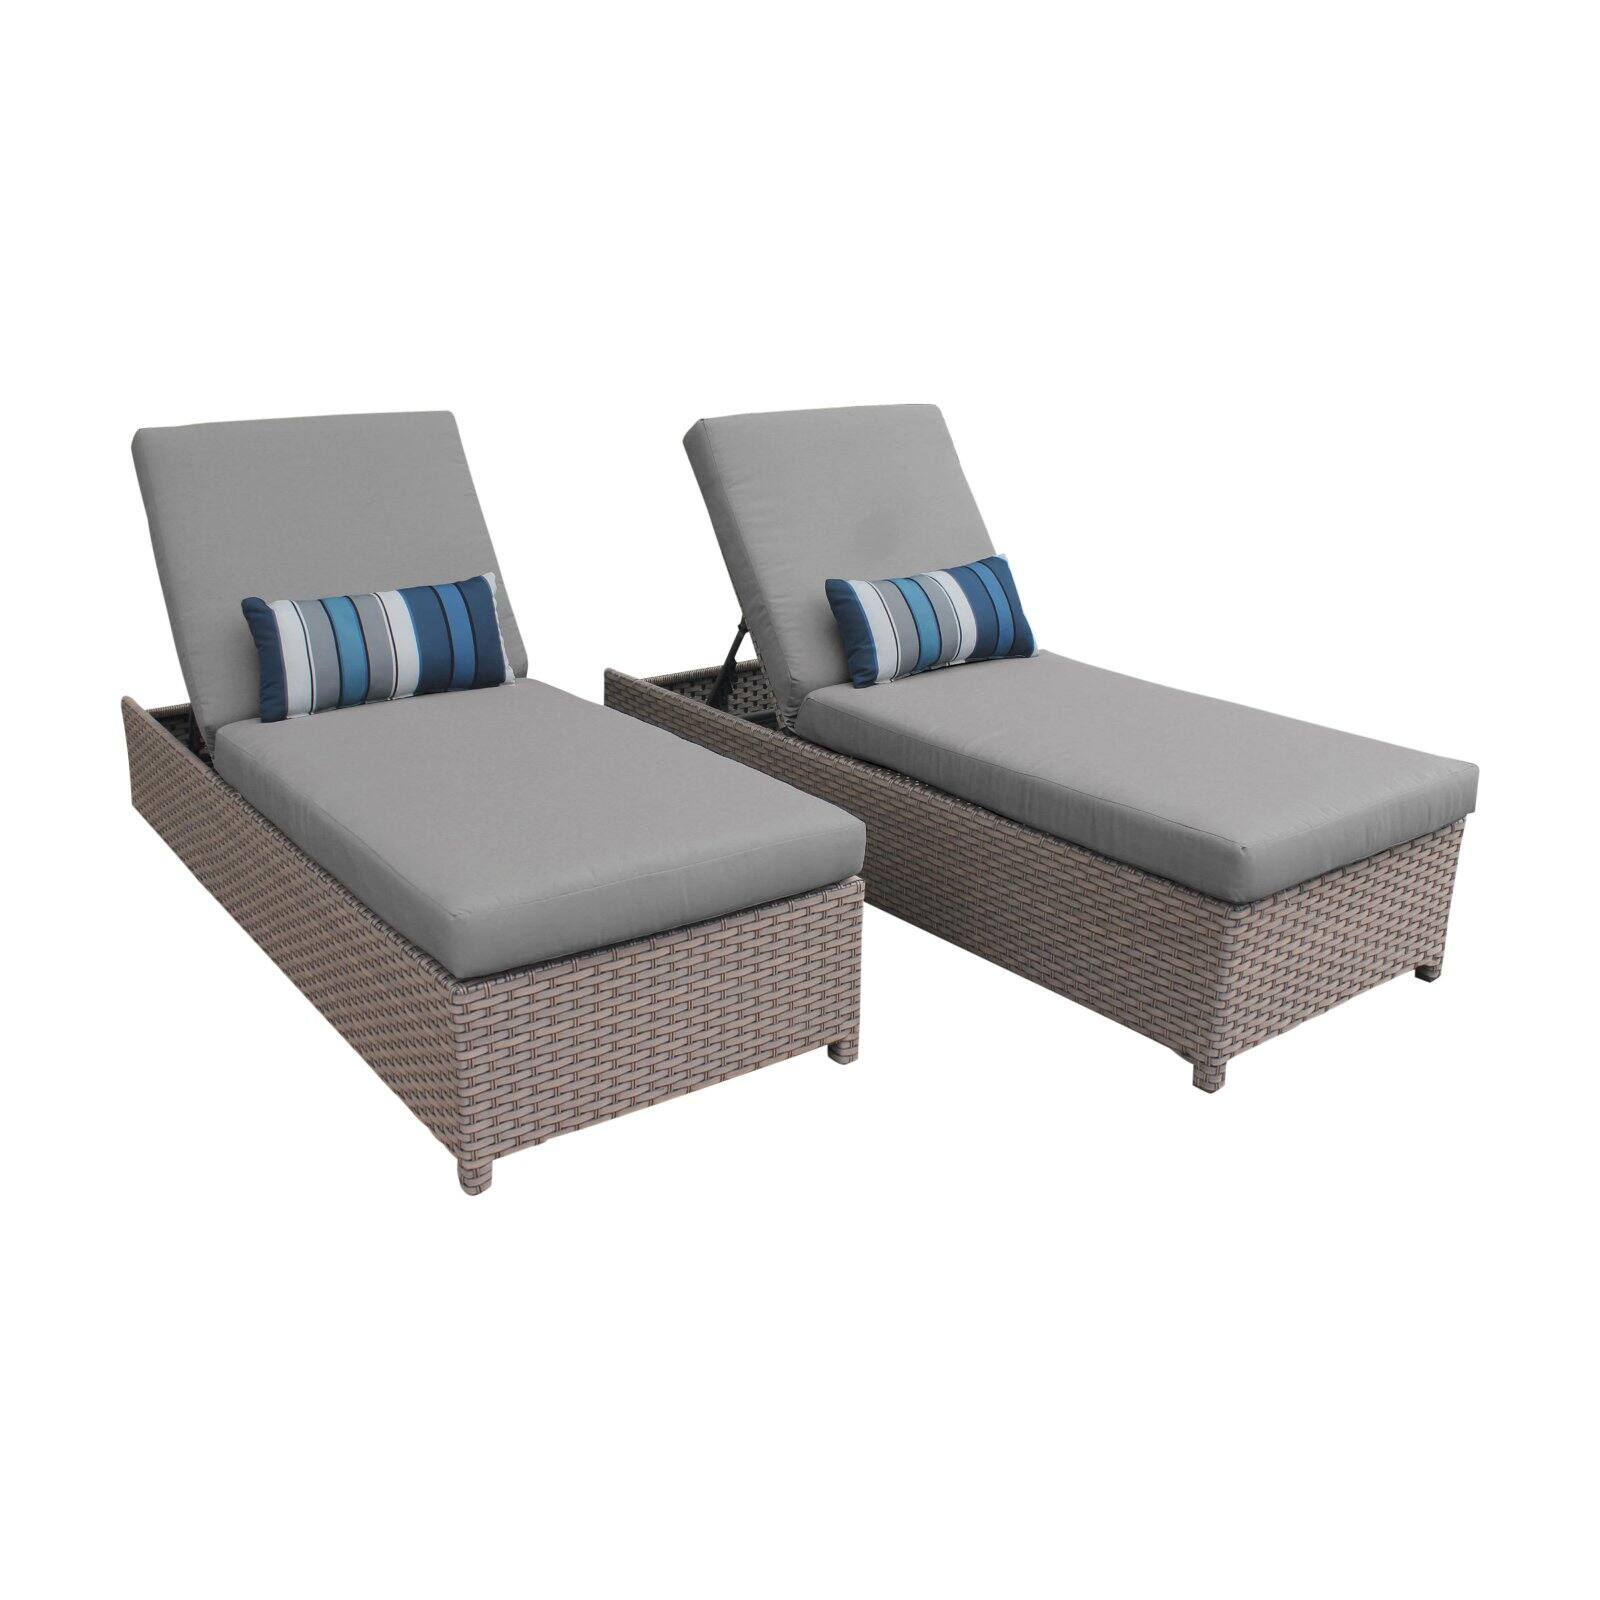 TK Classics Monterey Wheeled Wicker Outdoor Chaise Lounge Chair - Set of 2 - image 1 of 11